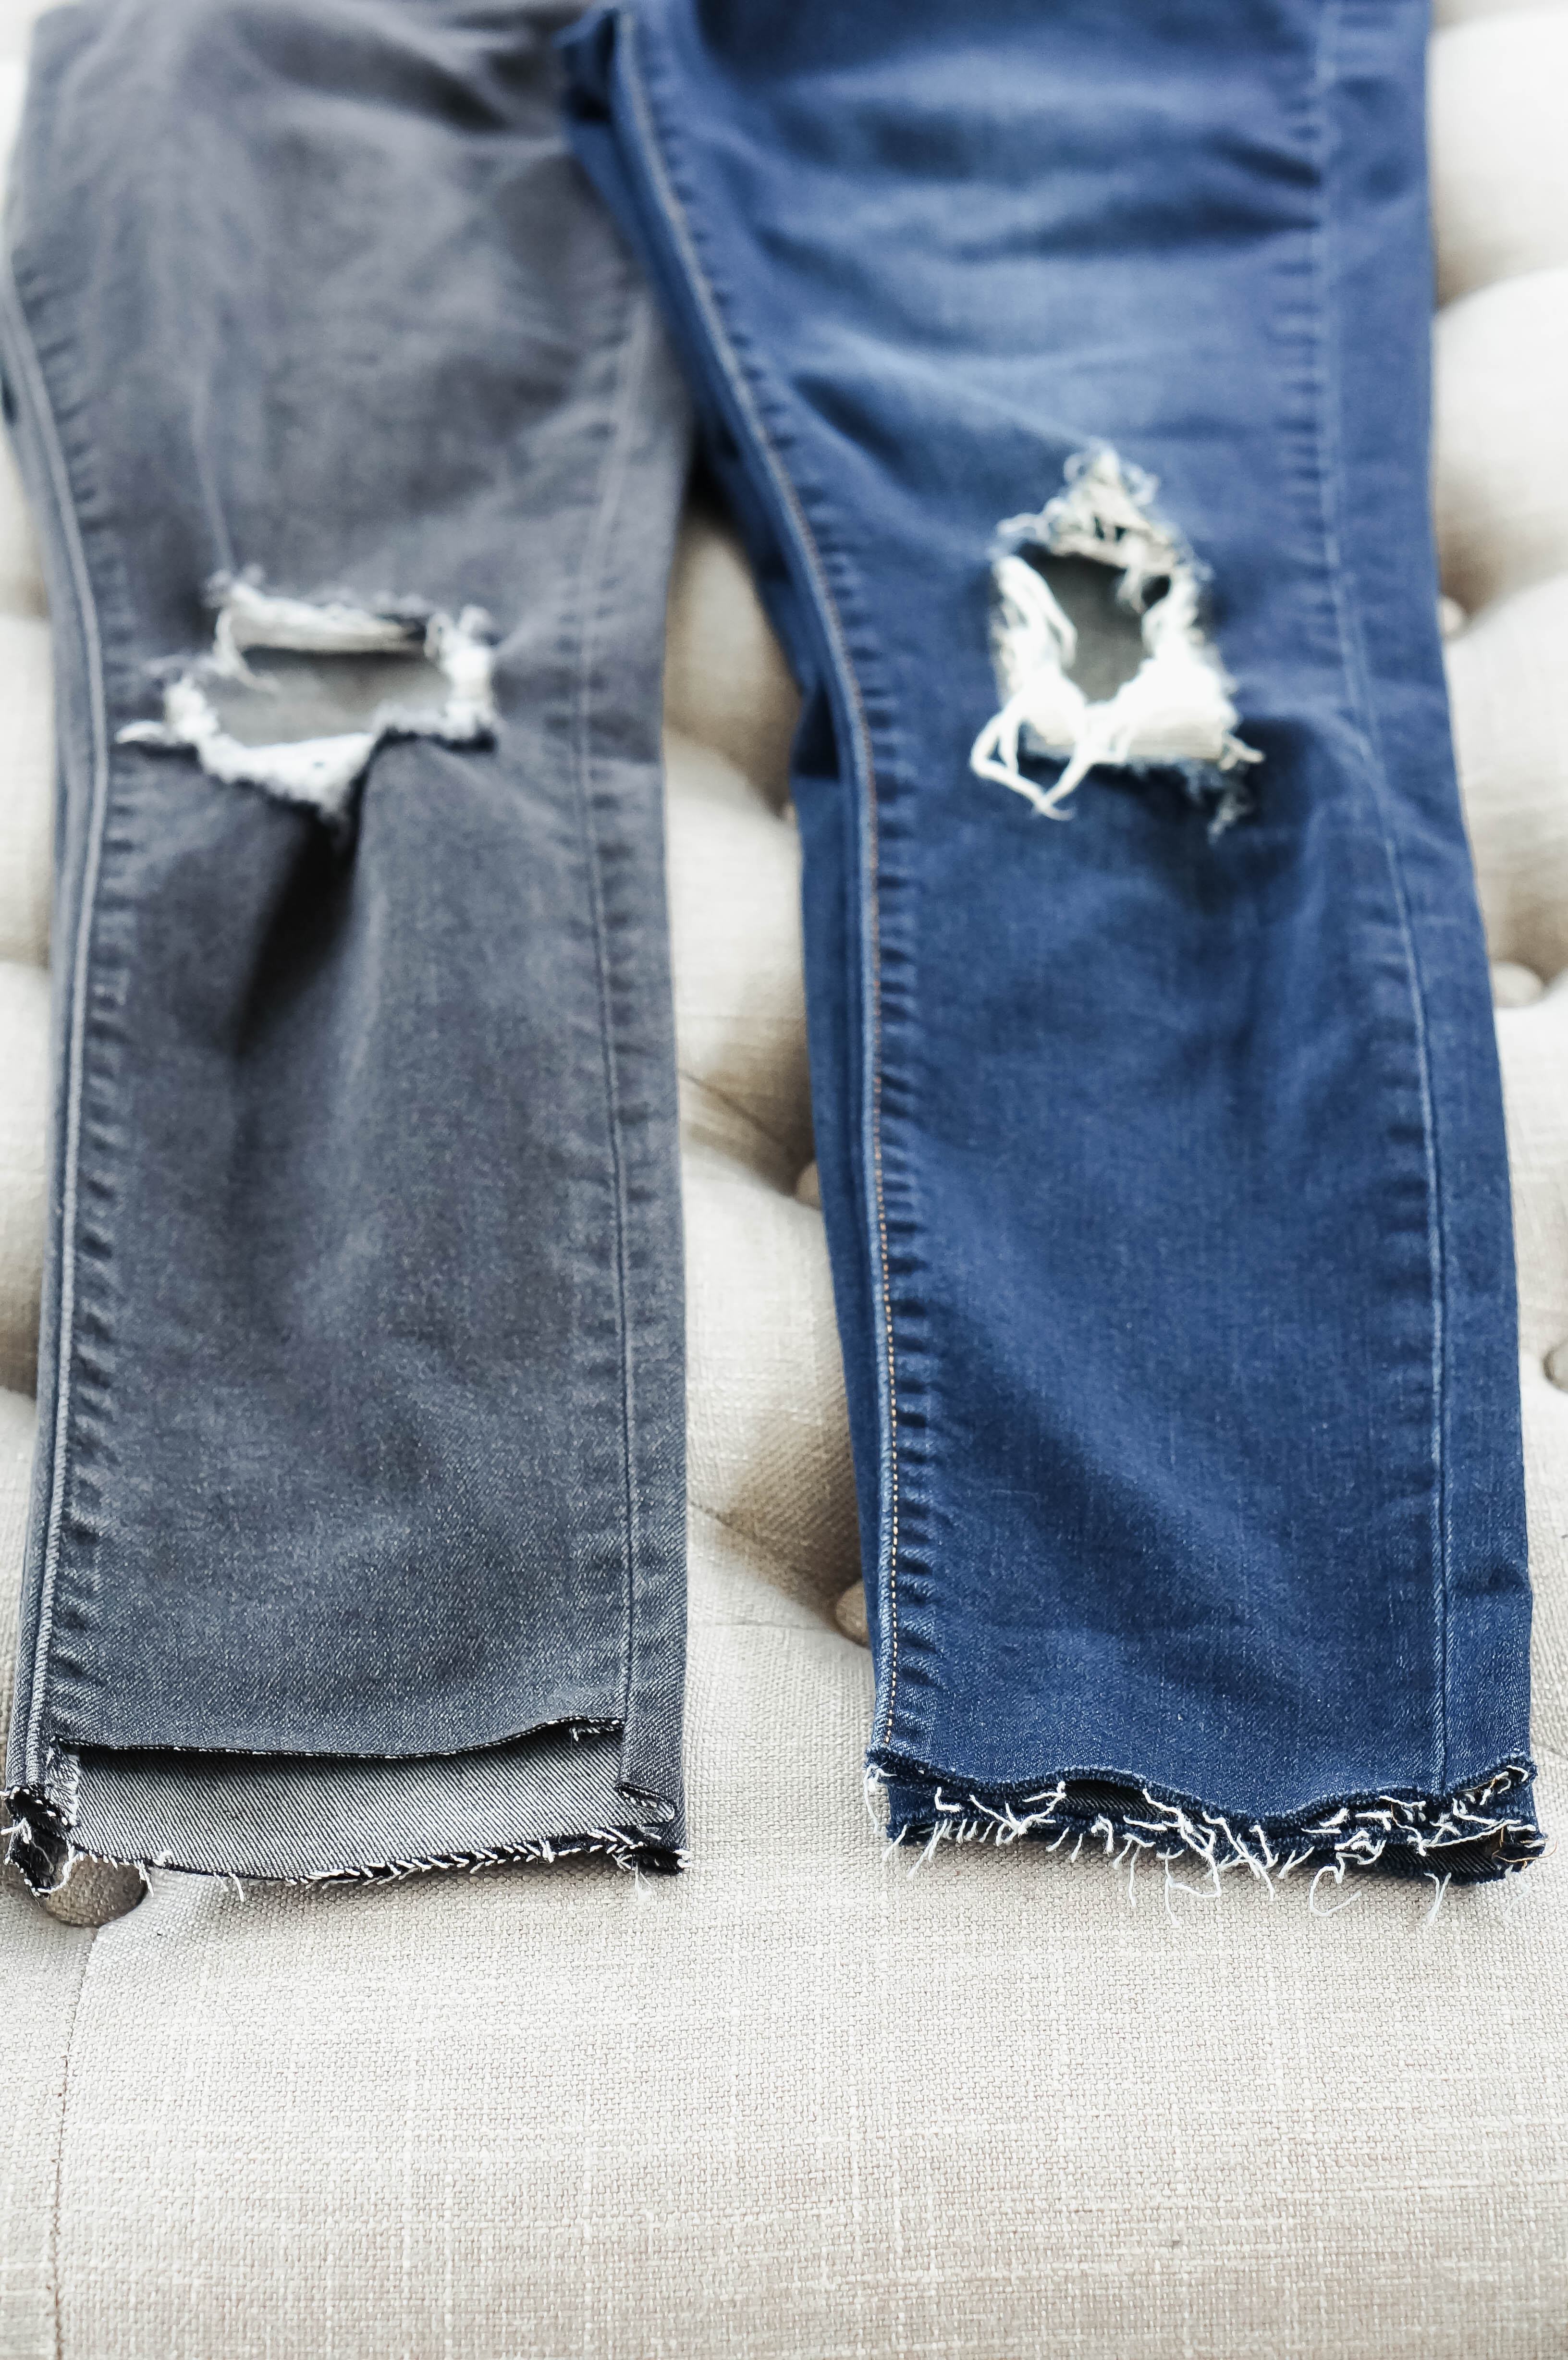 How to Cut the Hem Off Your Jeans